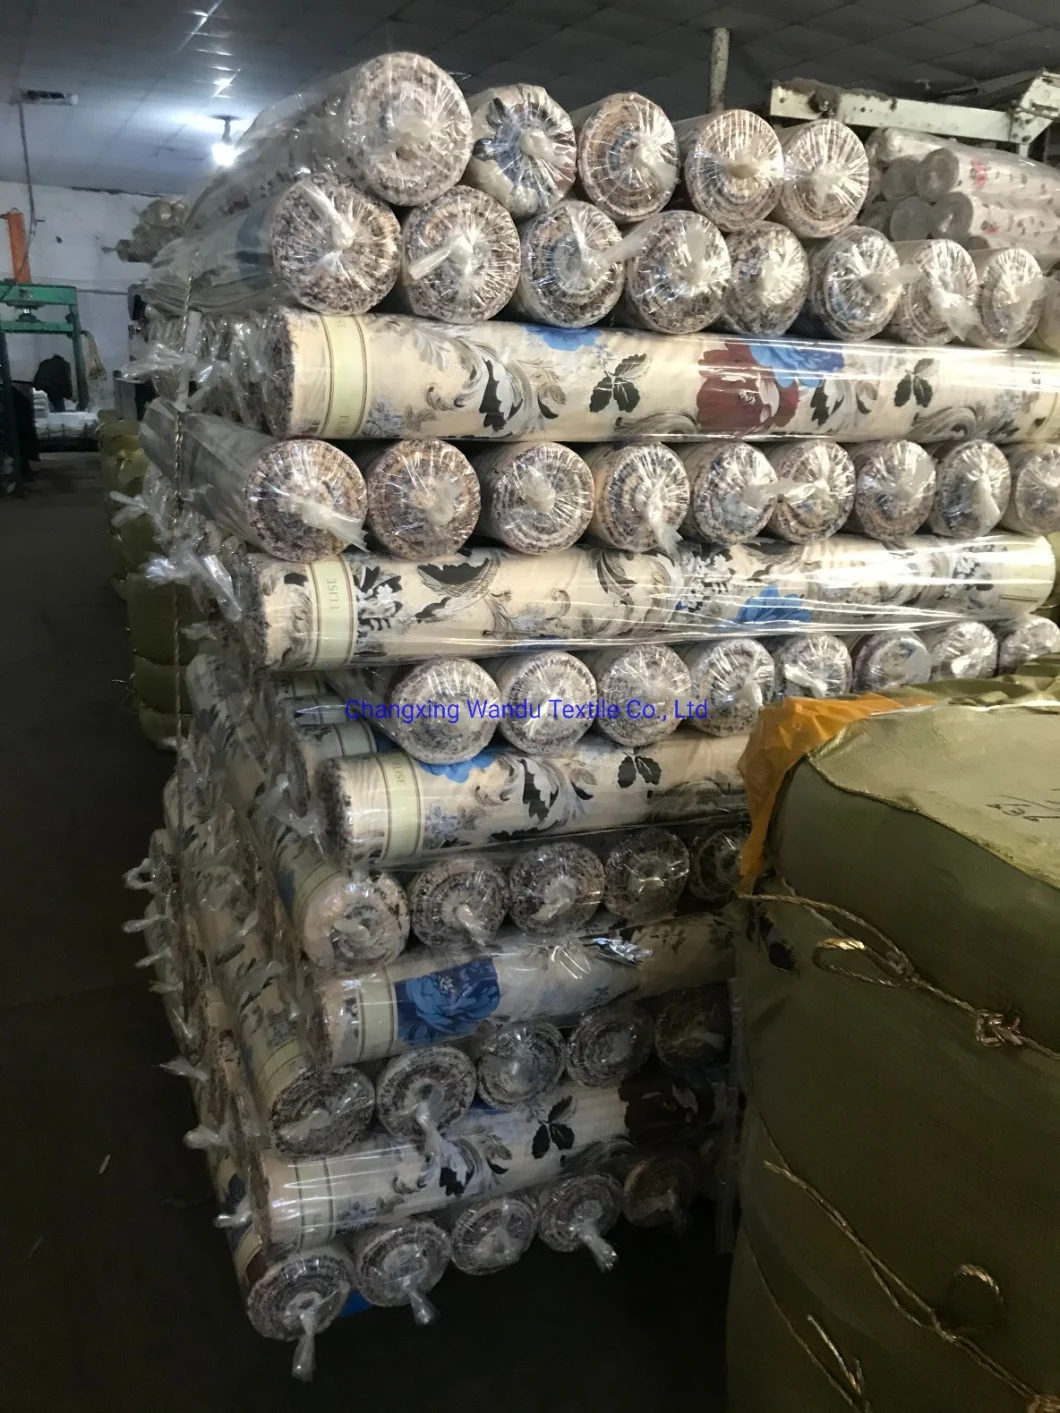 Changxing Wandu Textiles, The Latest Order for Export to June, All Polyester Fabric Bedsheets Such as Circles, Love Prints, etc.